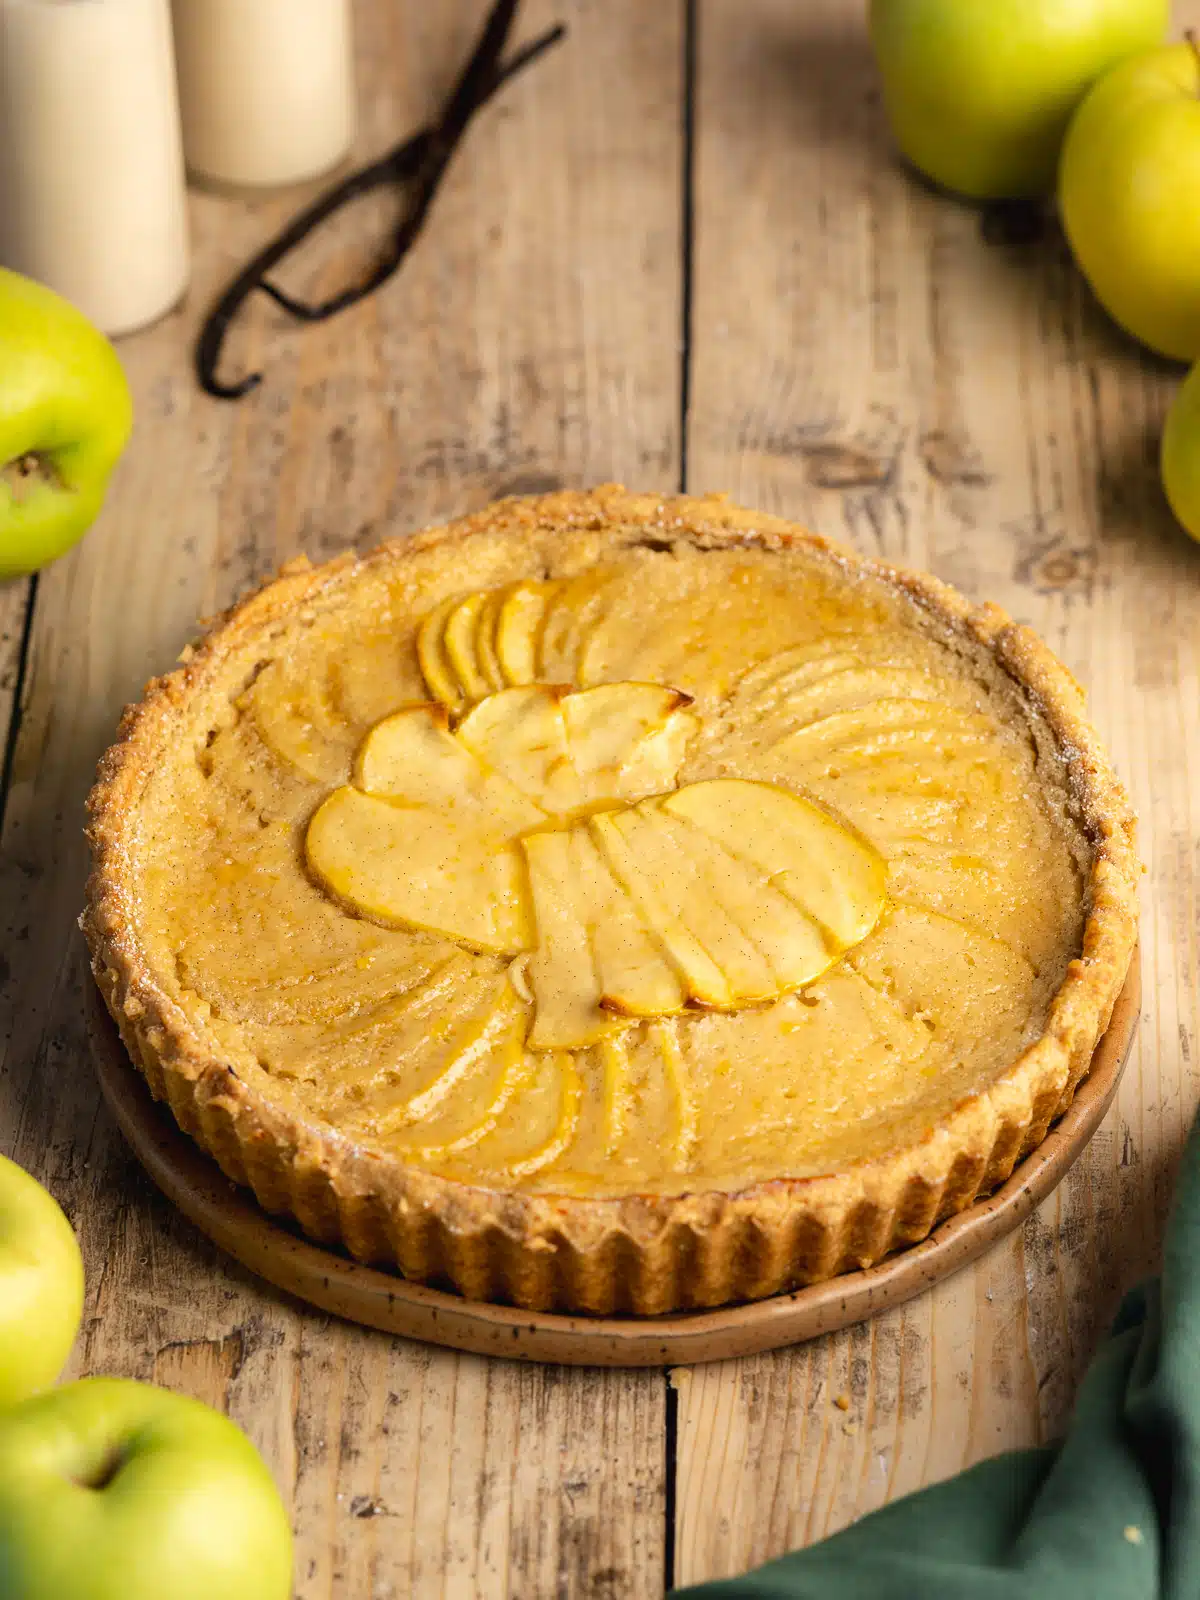 A vegan tart with apples on top of a wooden table.